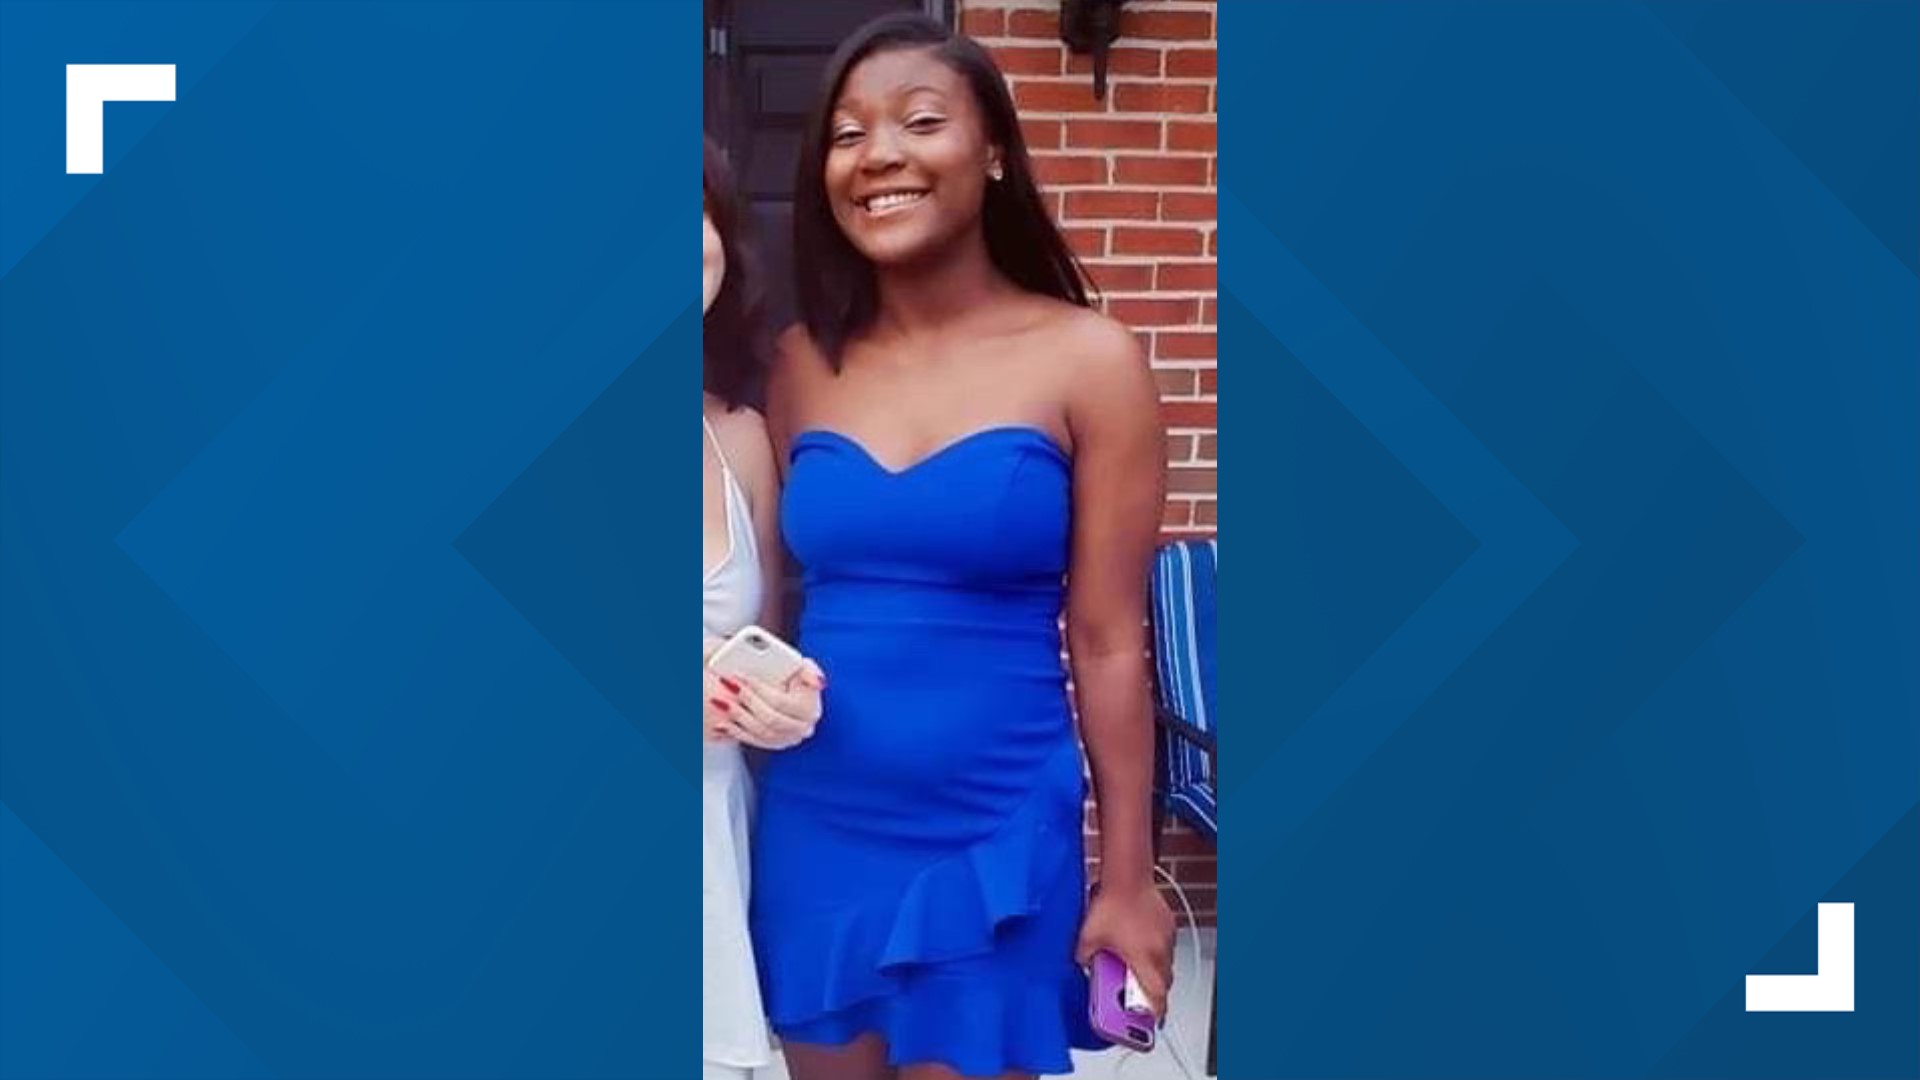 Gretchen Hazlett said she's been friends with 17-year-old Jayce O'Neal most of their lives. O'Neal was shot and killed Monday evening in west Columbus.